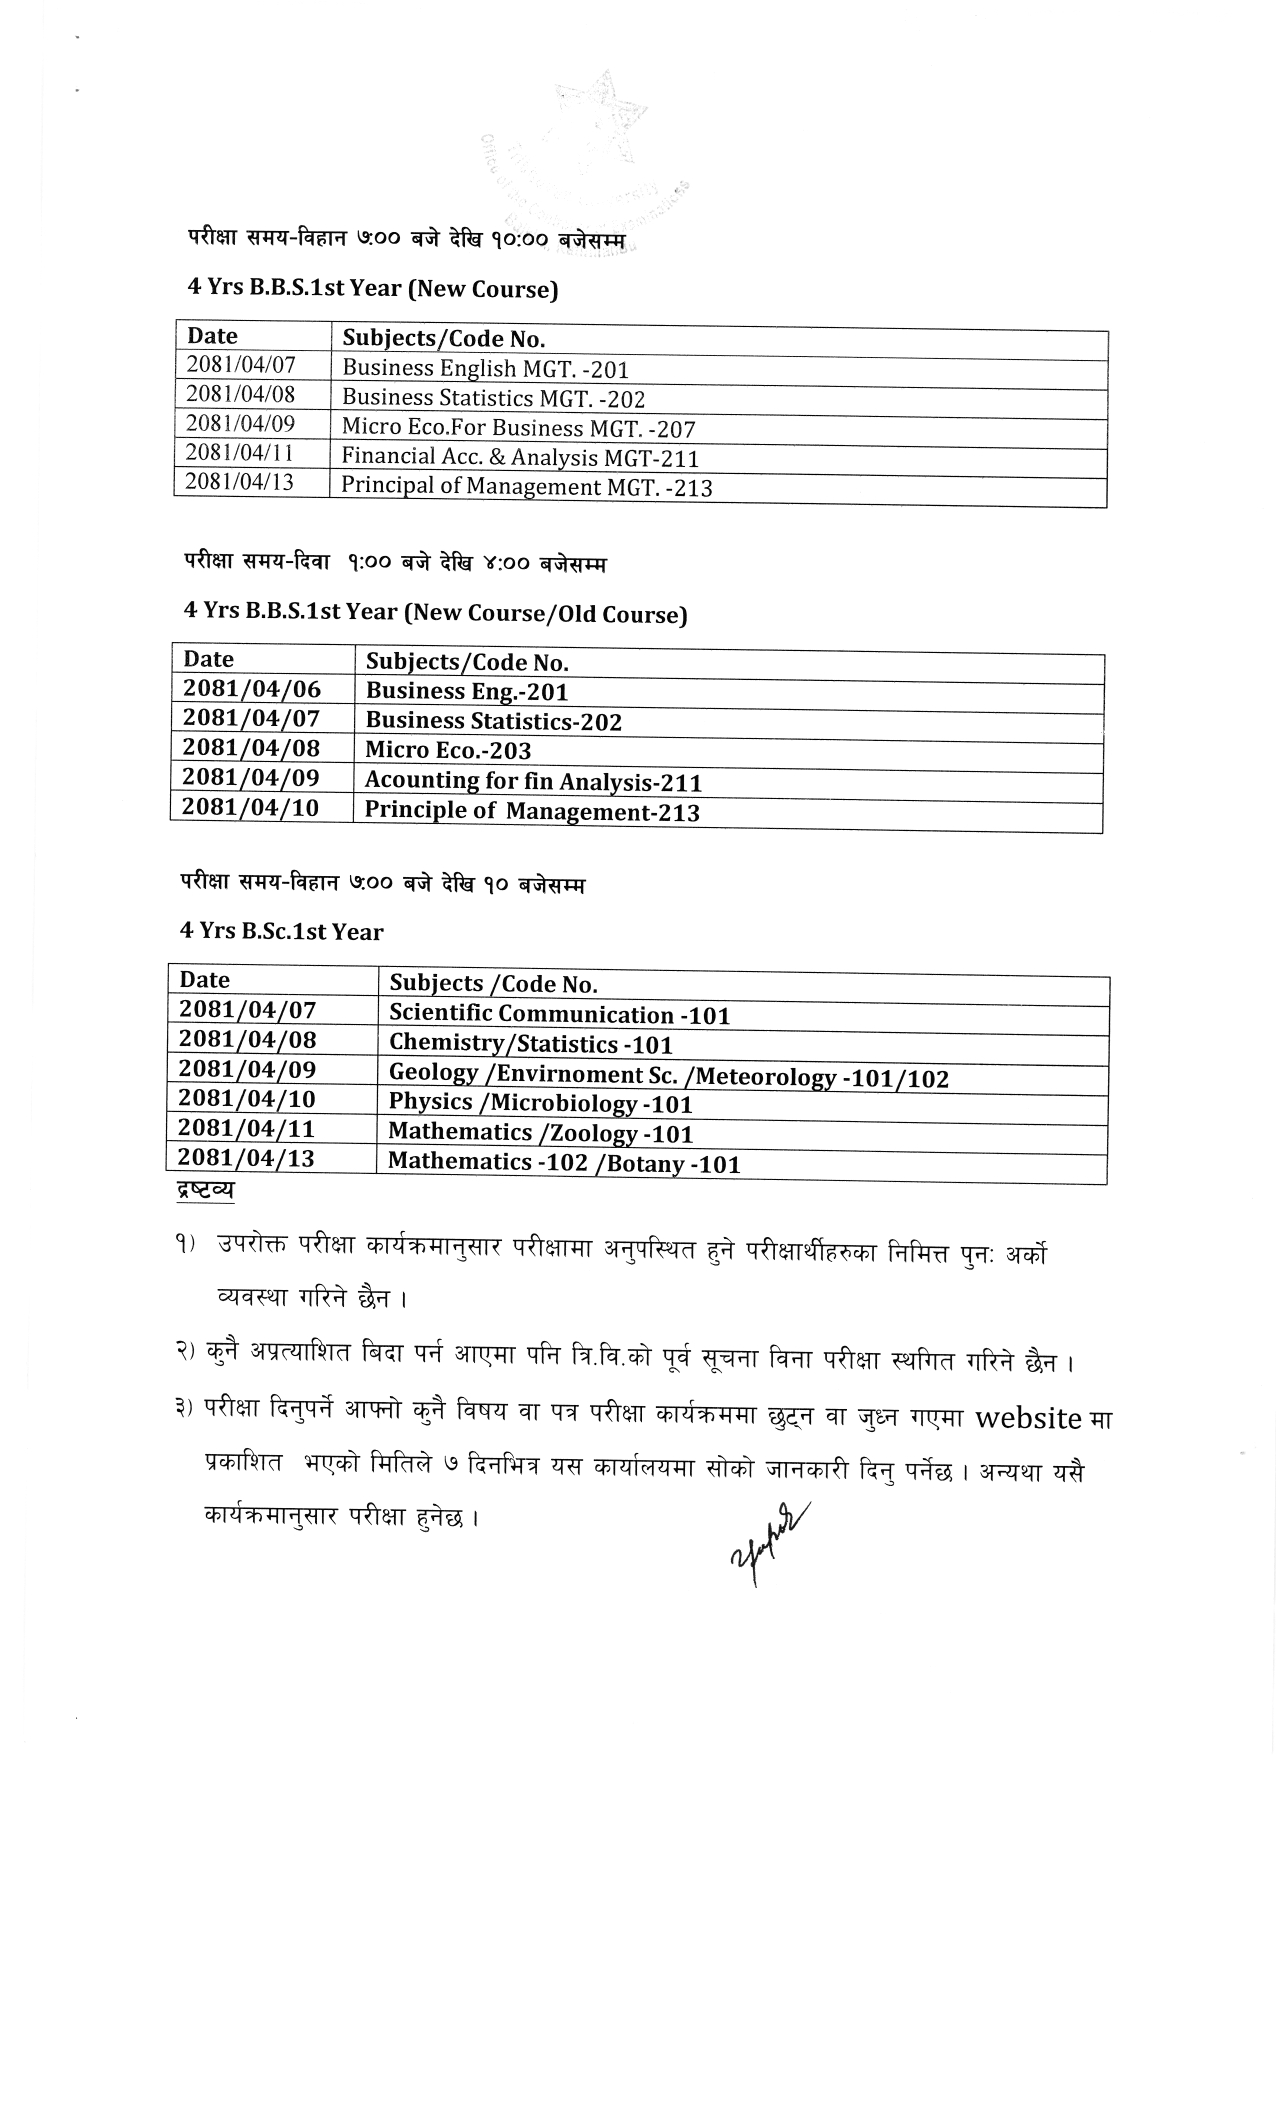 bbs_bsc_1st_year_exam_schedule_partial_page-0003.jpg